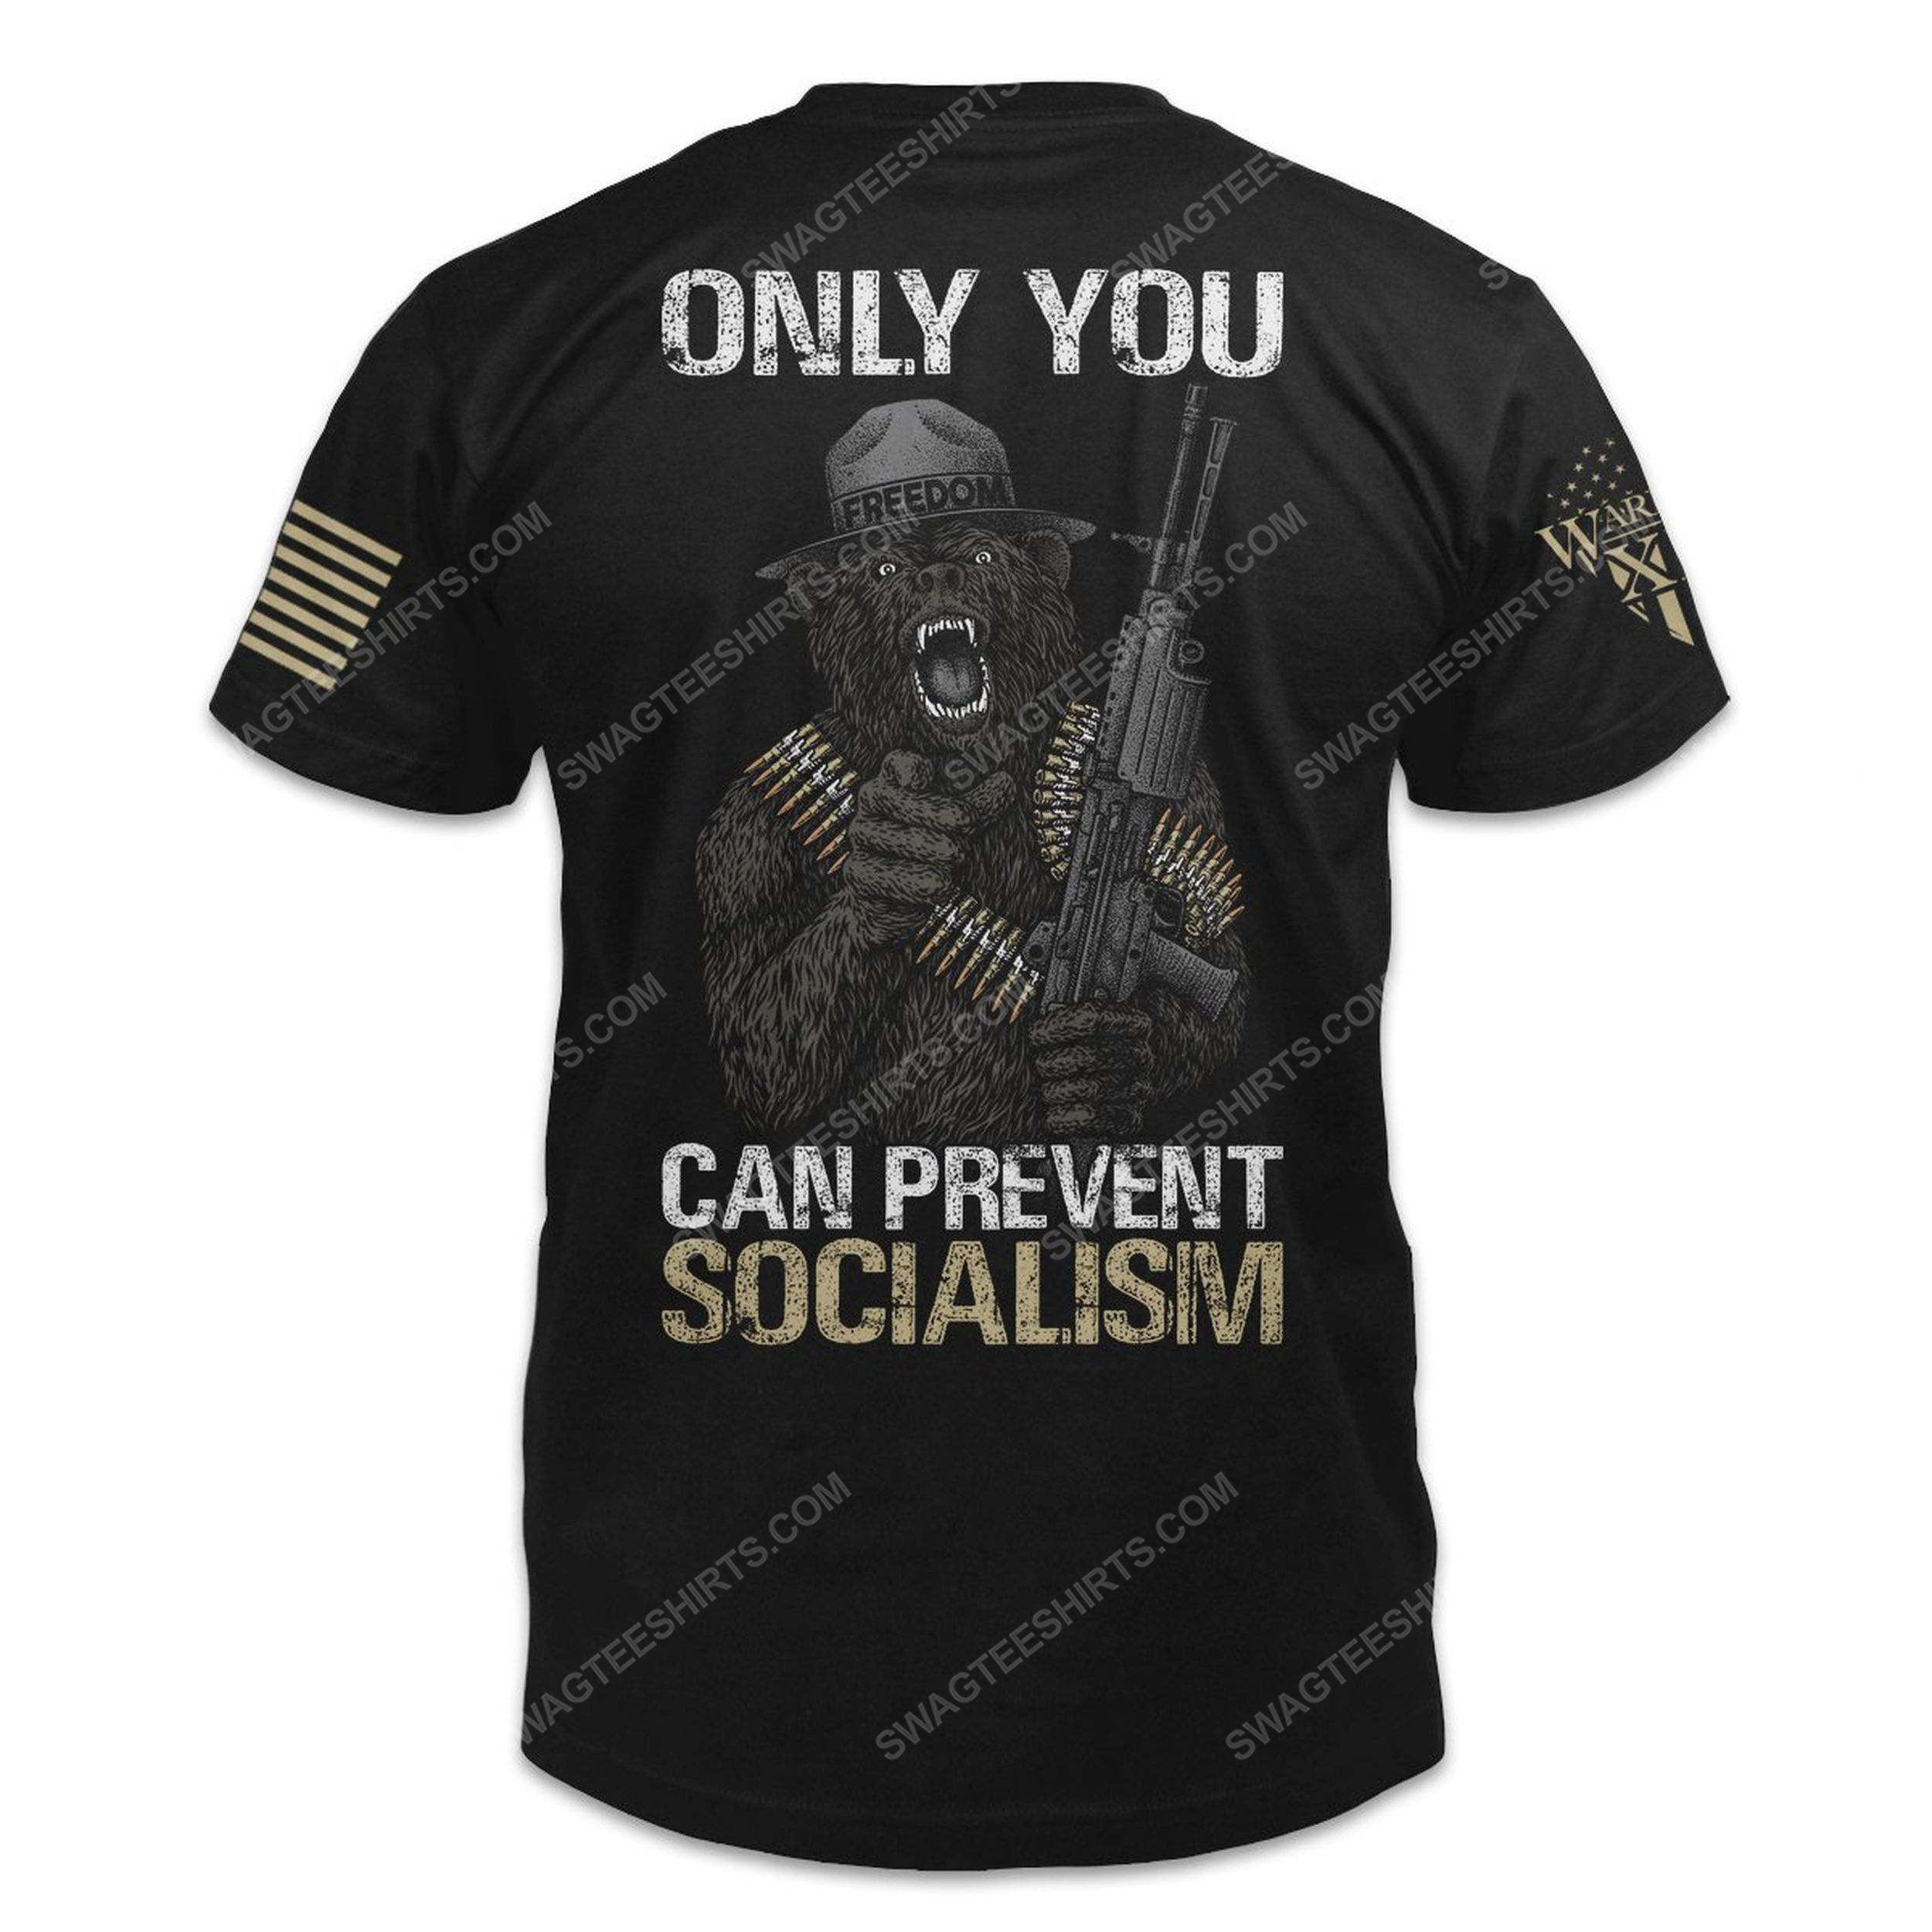 Only you can prevent socialism bear american flag shirt 4(1)